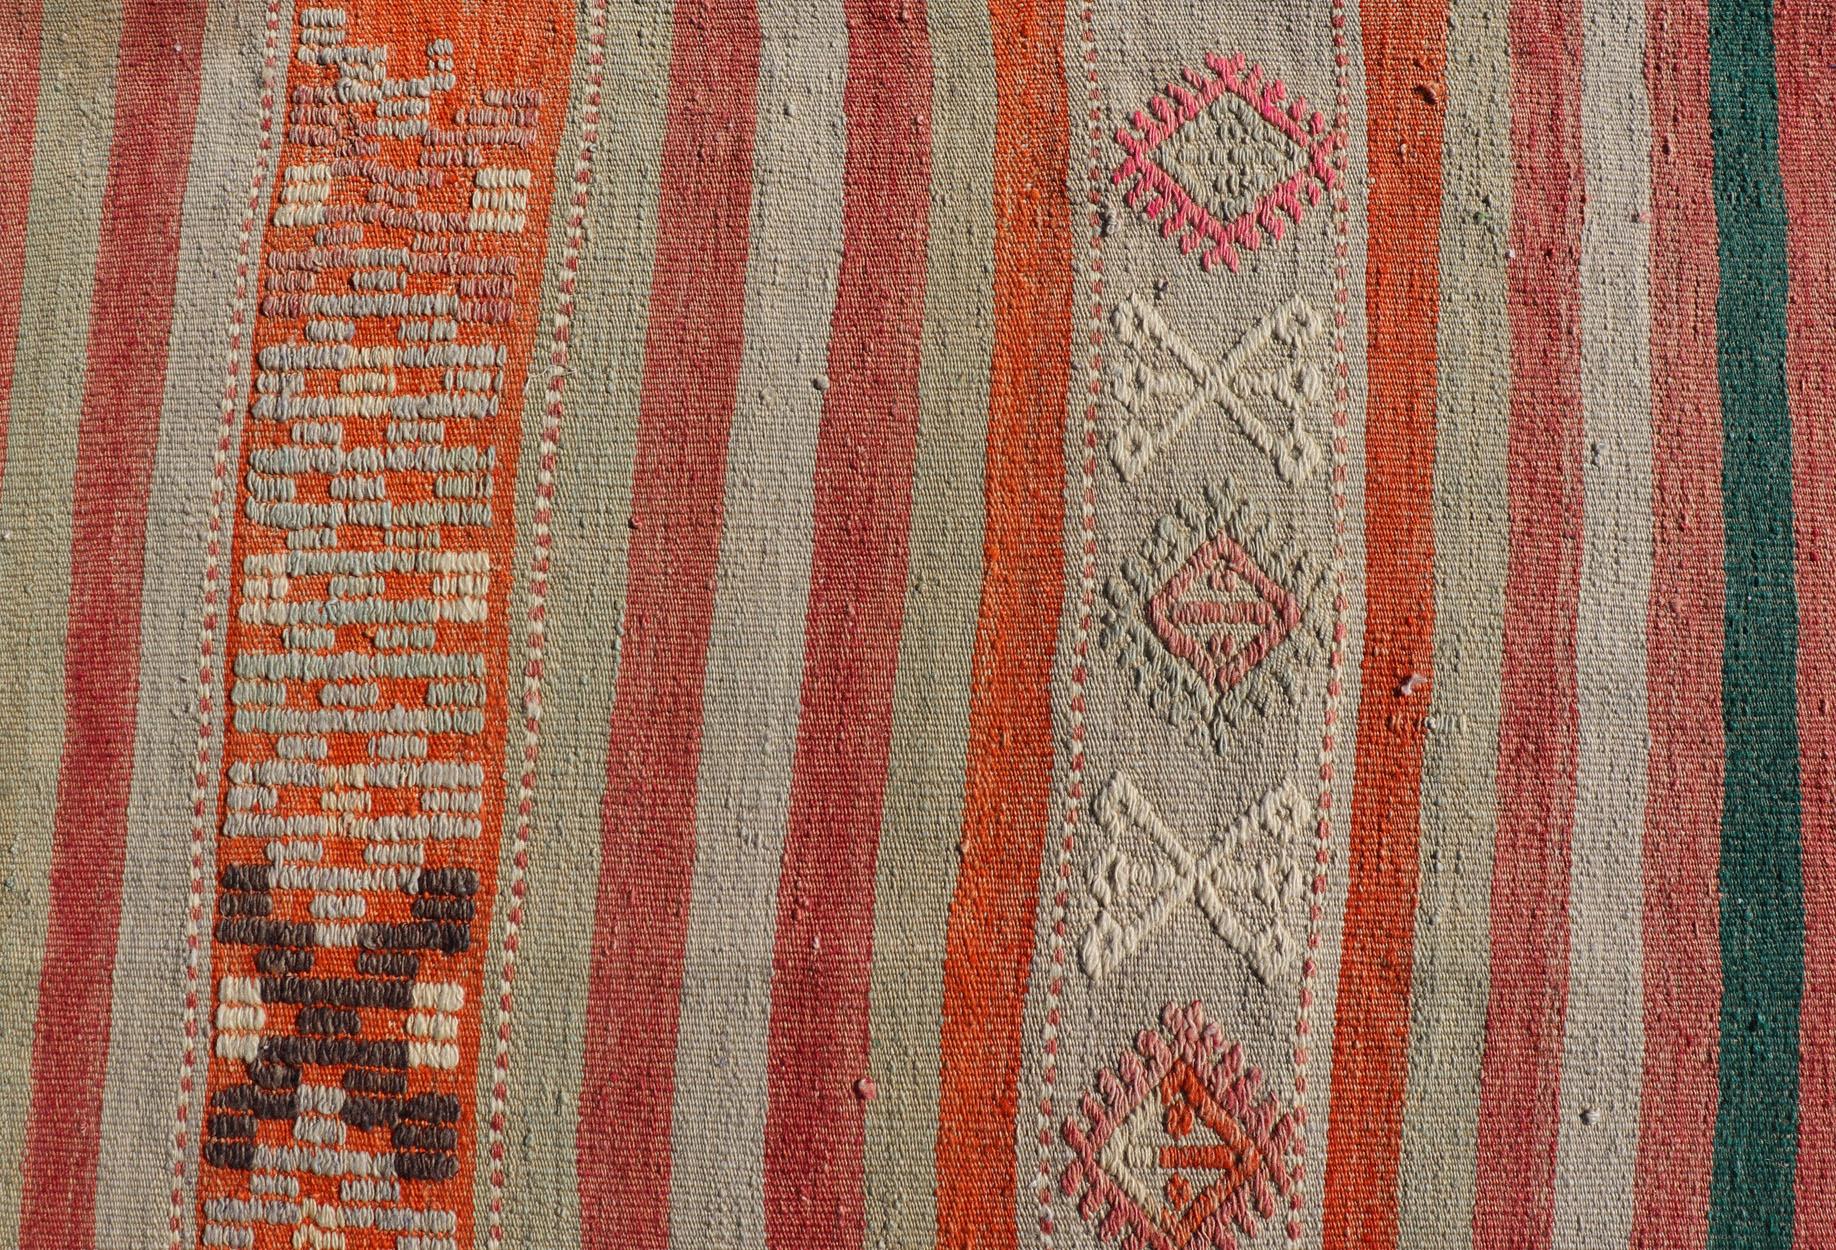 Vintage Turkish Kilim with Colorful Stripes in Orange, Lt. green, red & gray  For Sale 6